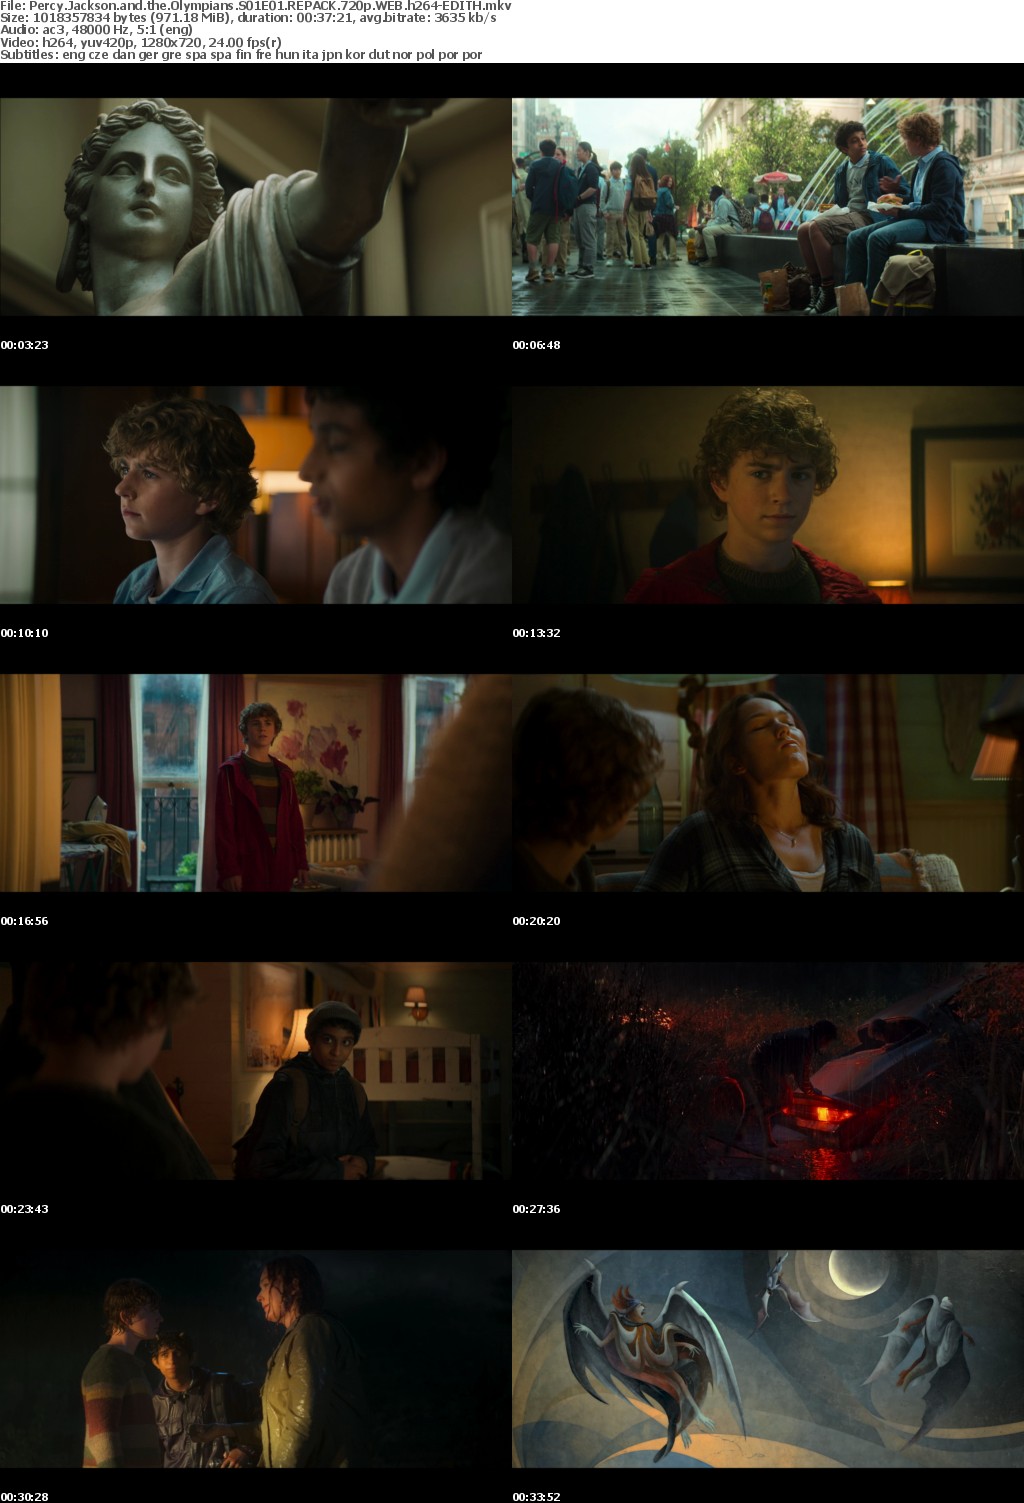 Percy Jackson and the Olympians S01E01 REPACK 720p WEB h264-EDITH